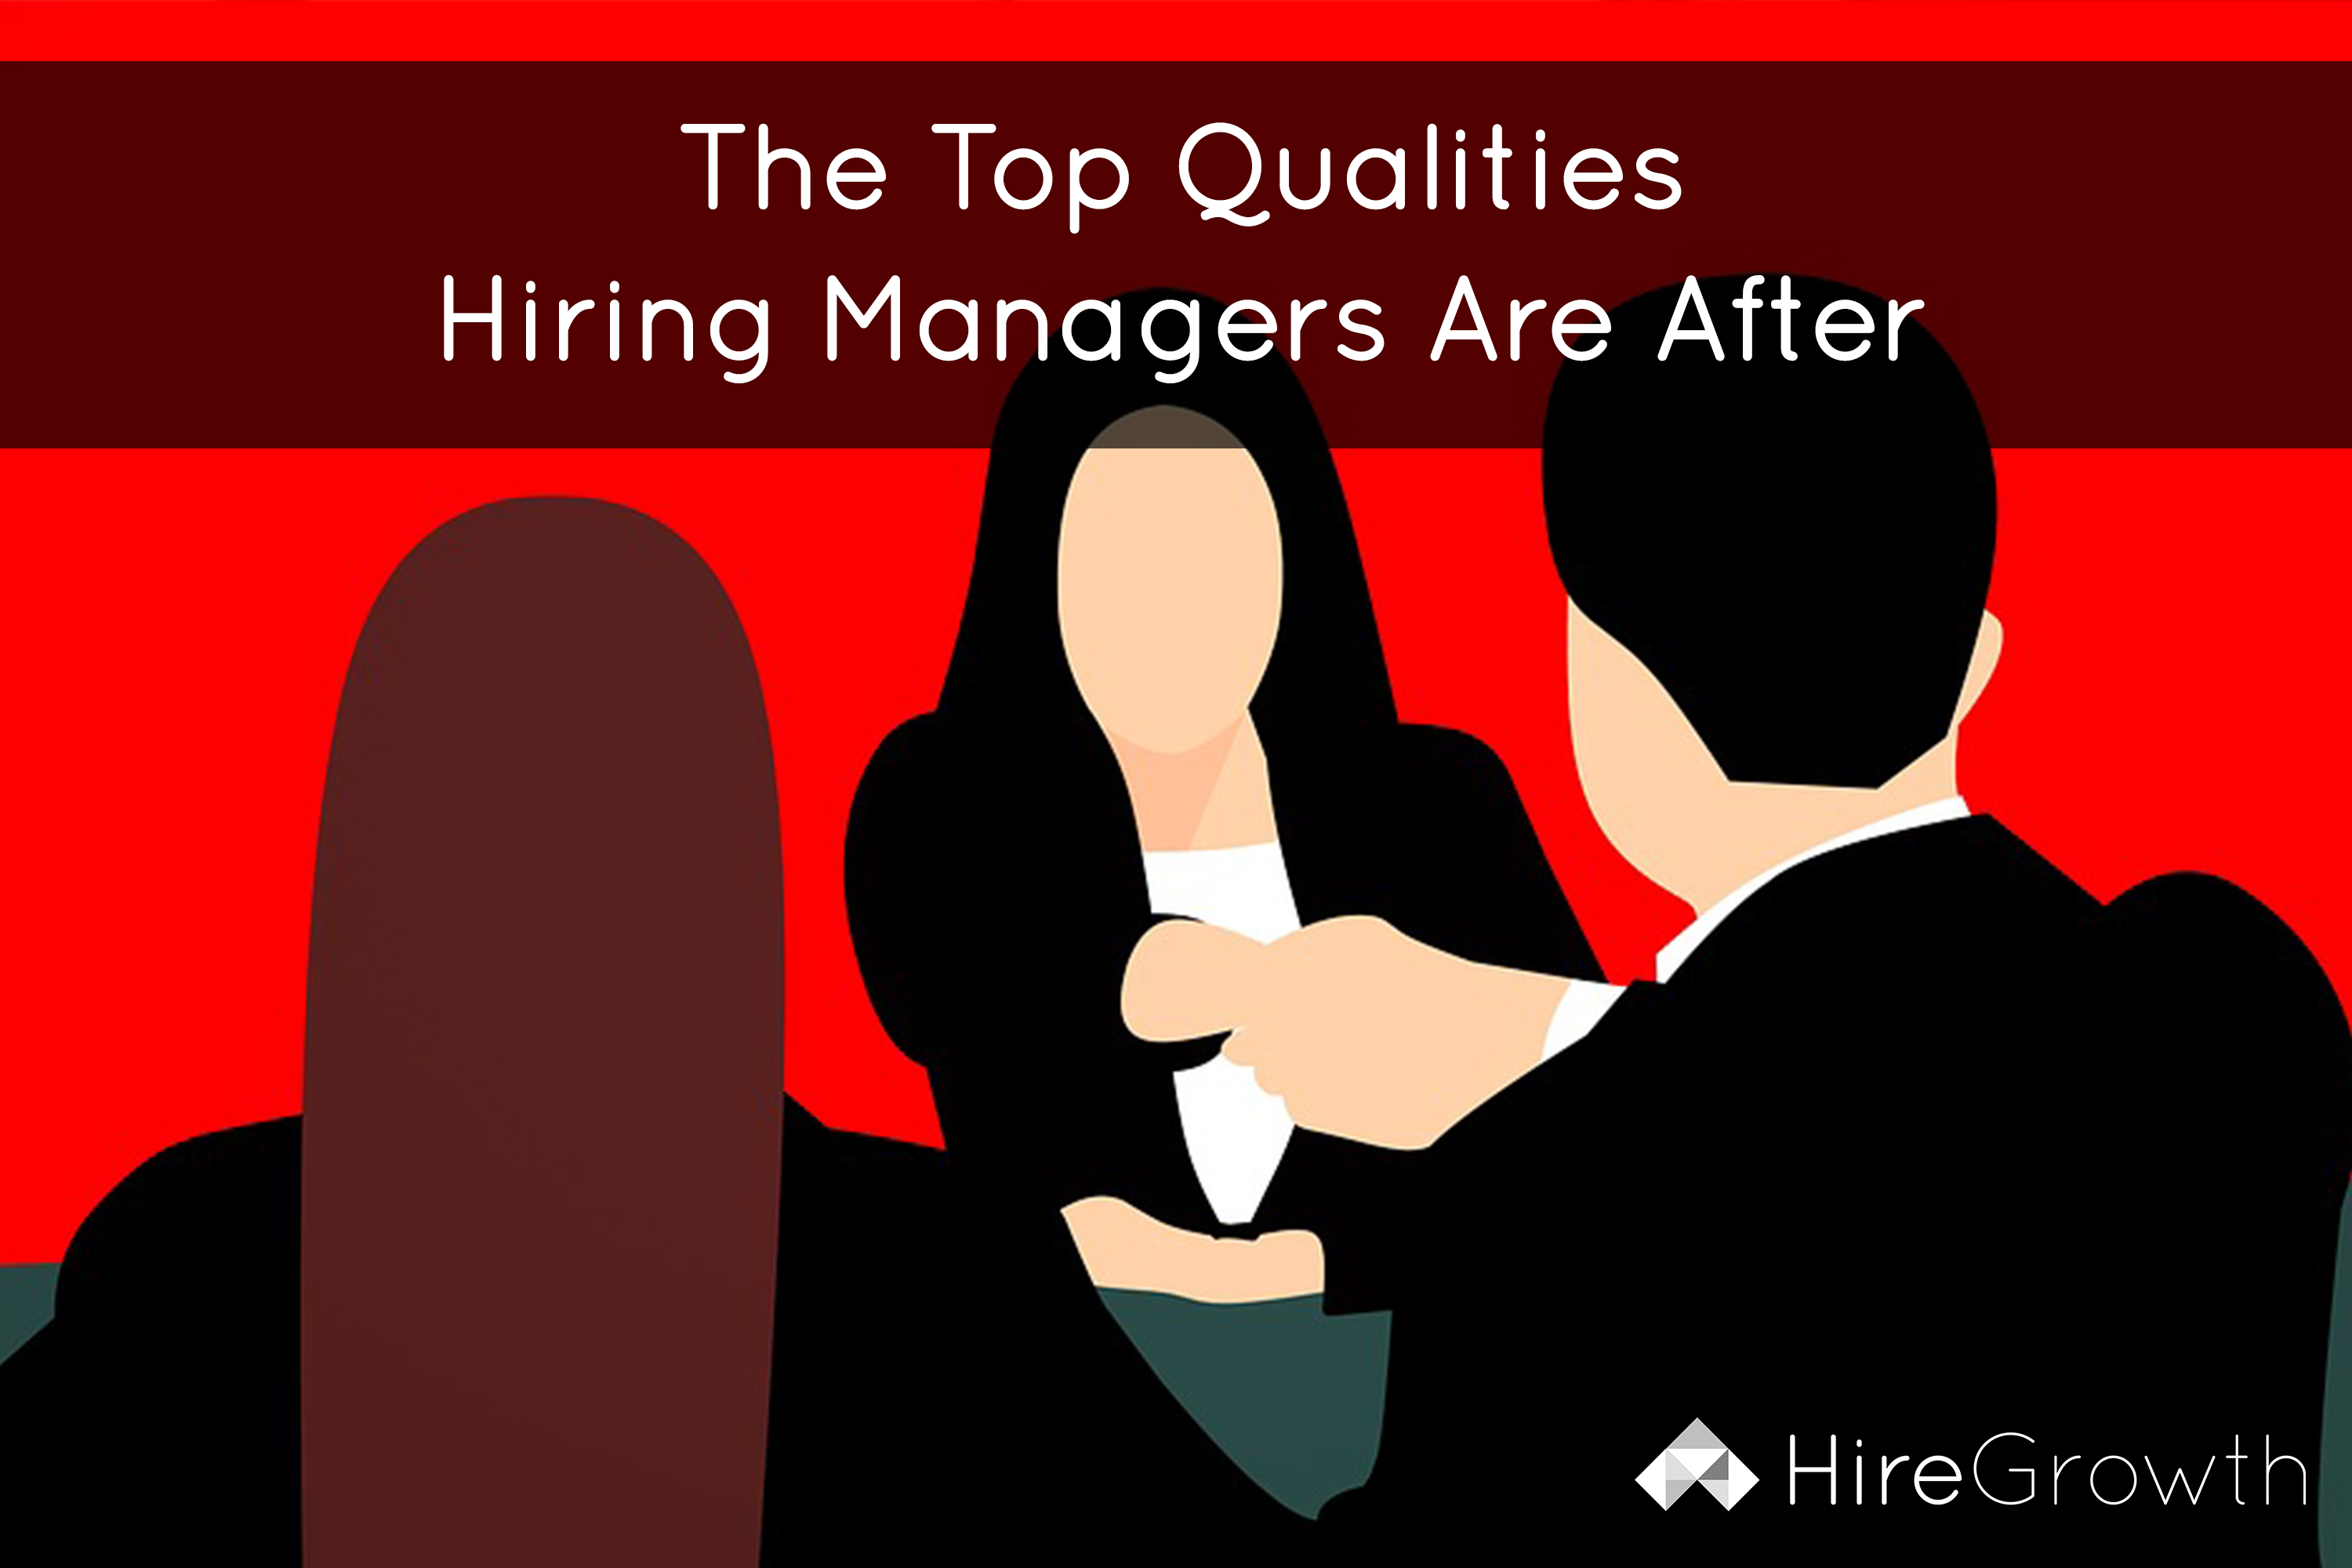 The Top Qualities Hiring Managers Are After